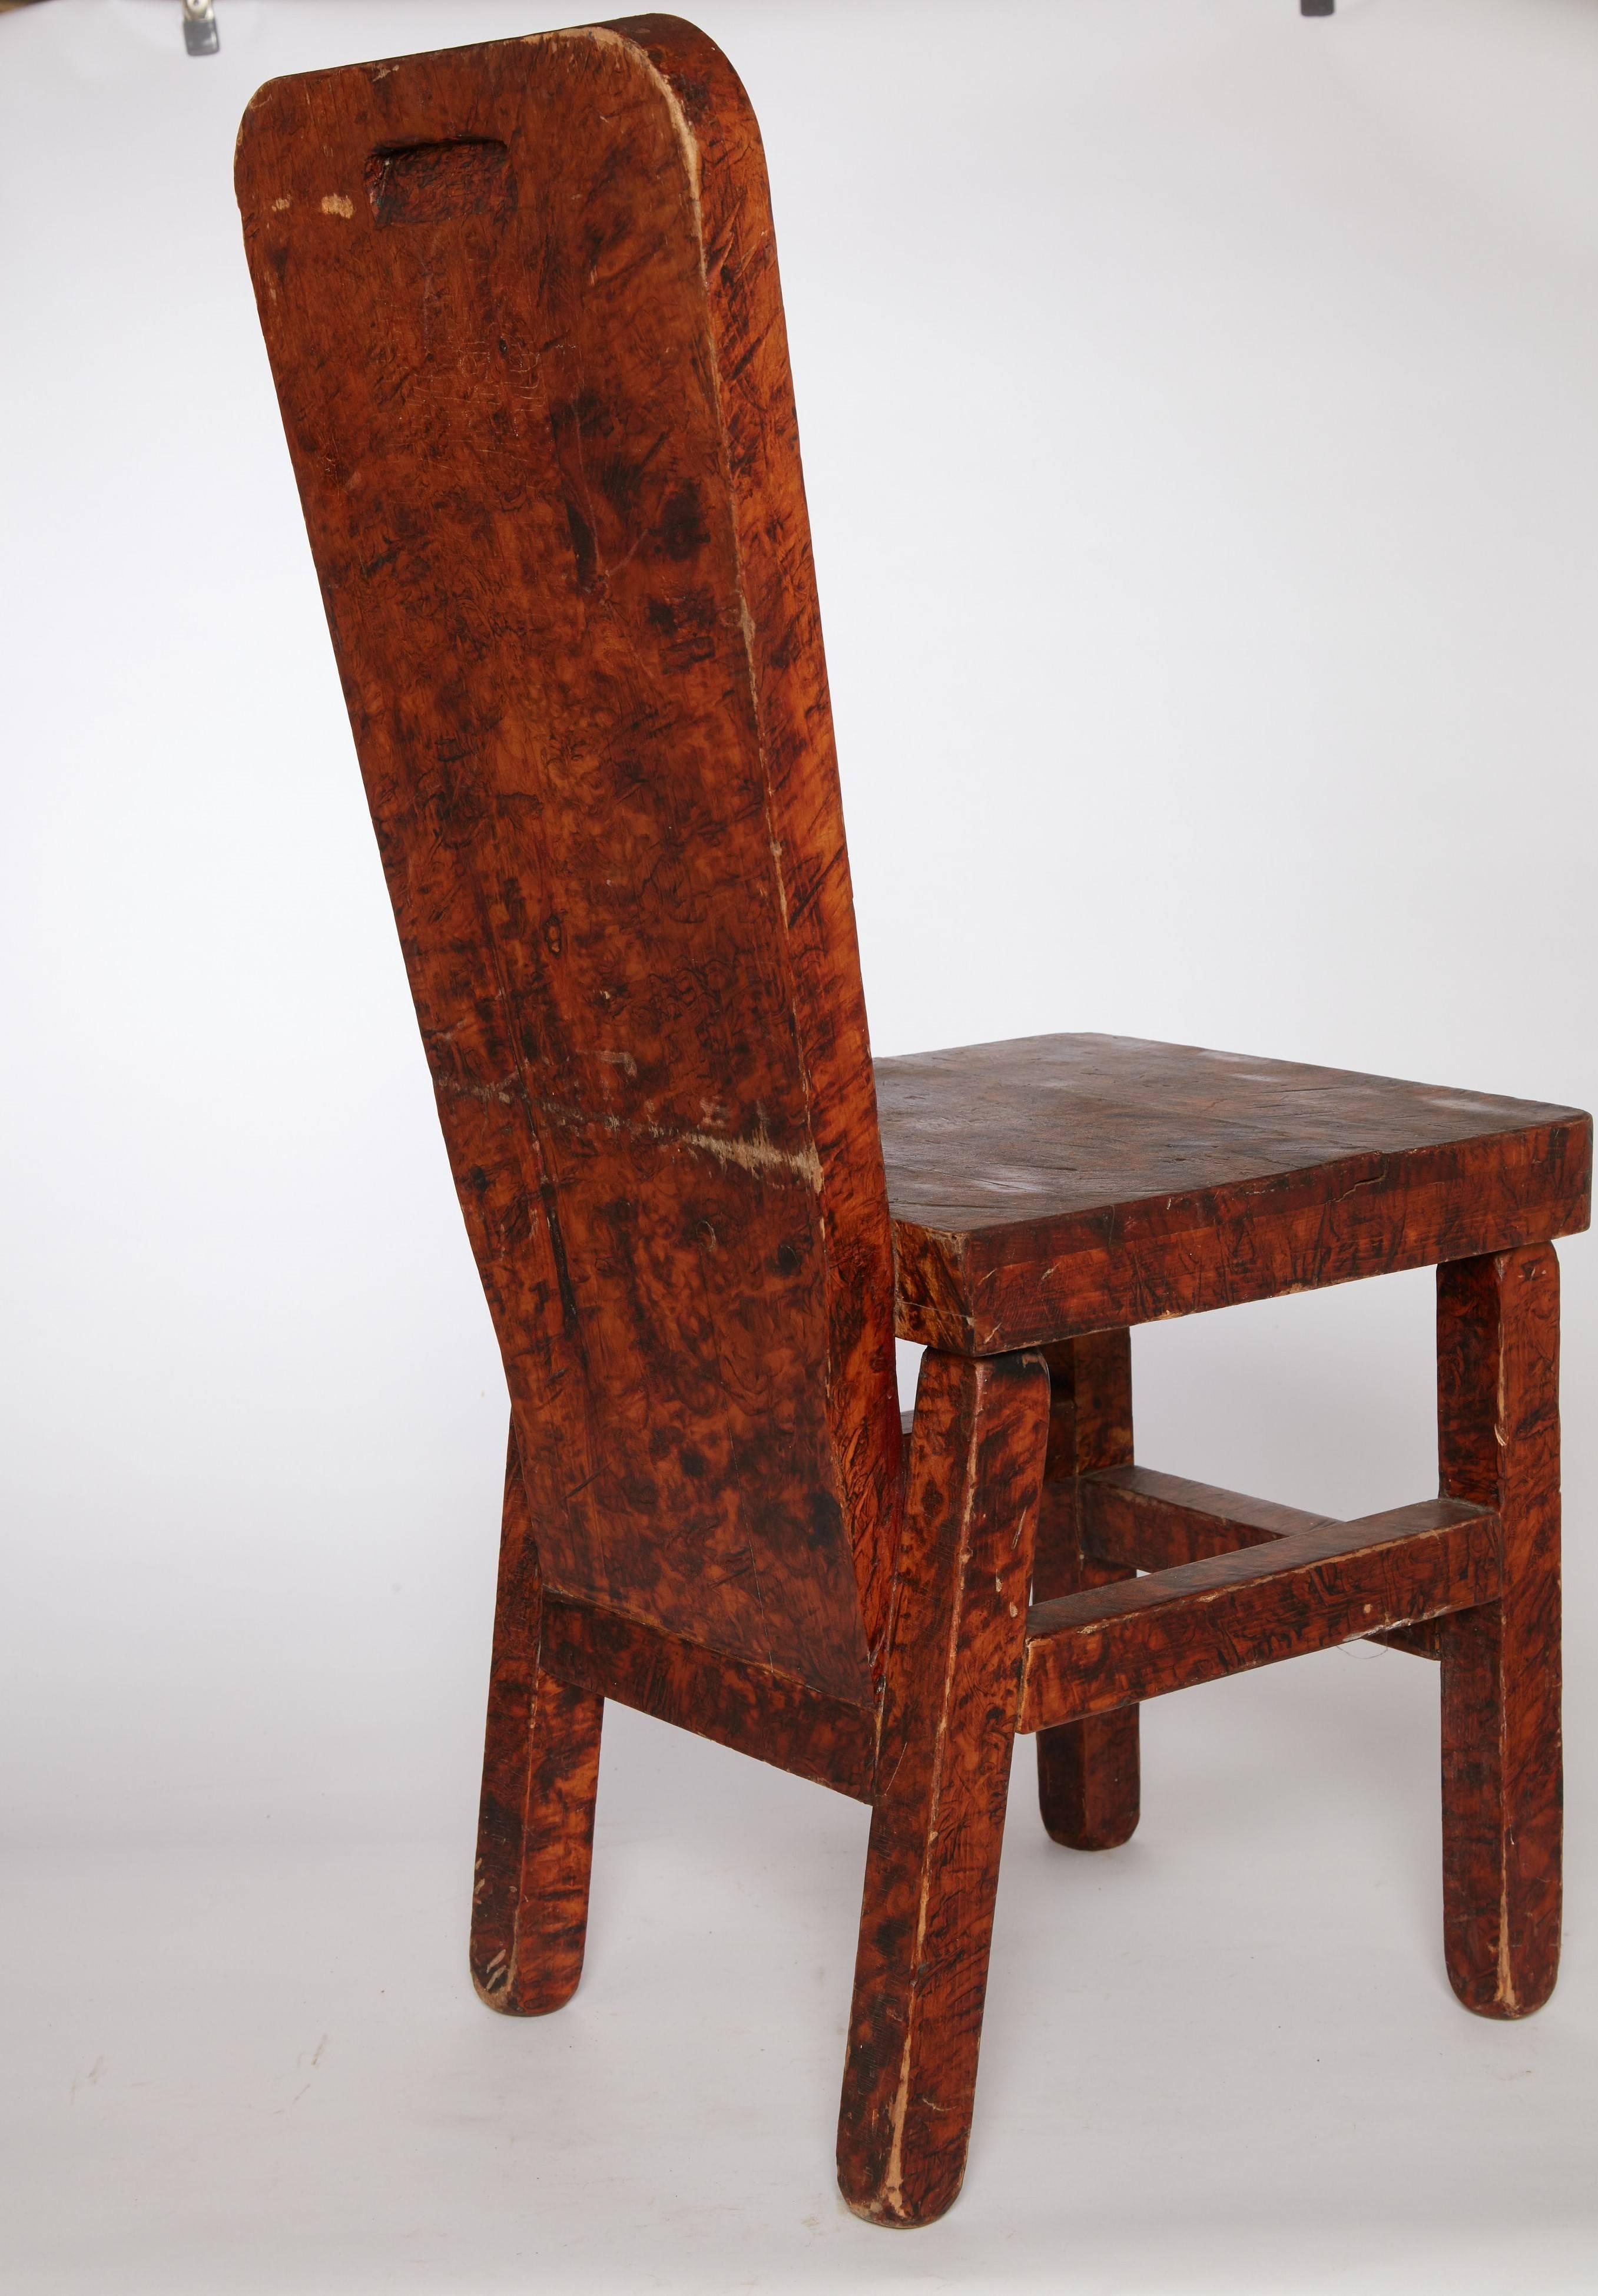 Late 19th century American handmade burled wood chair 
Great looking accent chair with beautiful patina and wood grain.








Dimensions: 37 in. H x 15.75 in. W x 16 in. D from floor to top of chair; 18 in. H from floor to seat. Legs are